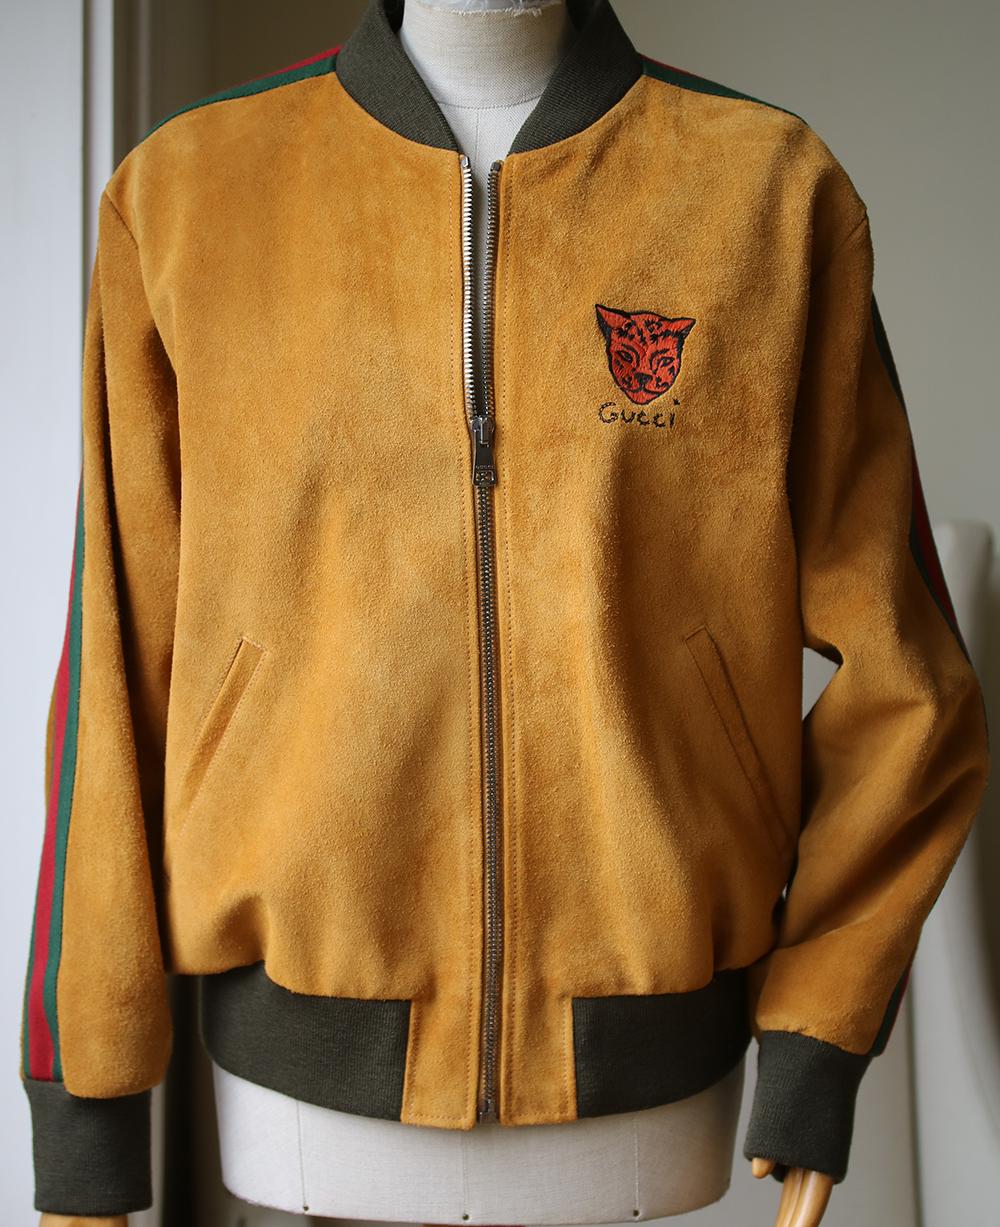 Gucci's suede bomber jacket ticks all the boxes when it comes to new-season outerwear. It's been crafted in Italy from calf suede in a rich mustard shade and is detailed with embroidery at the chest that depicts the label's signature tiger head and